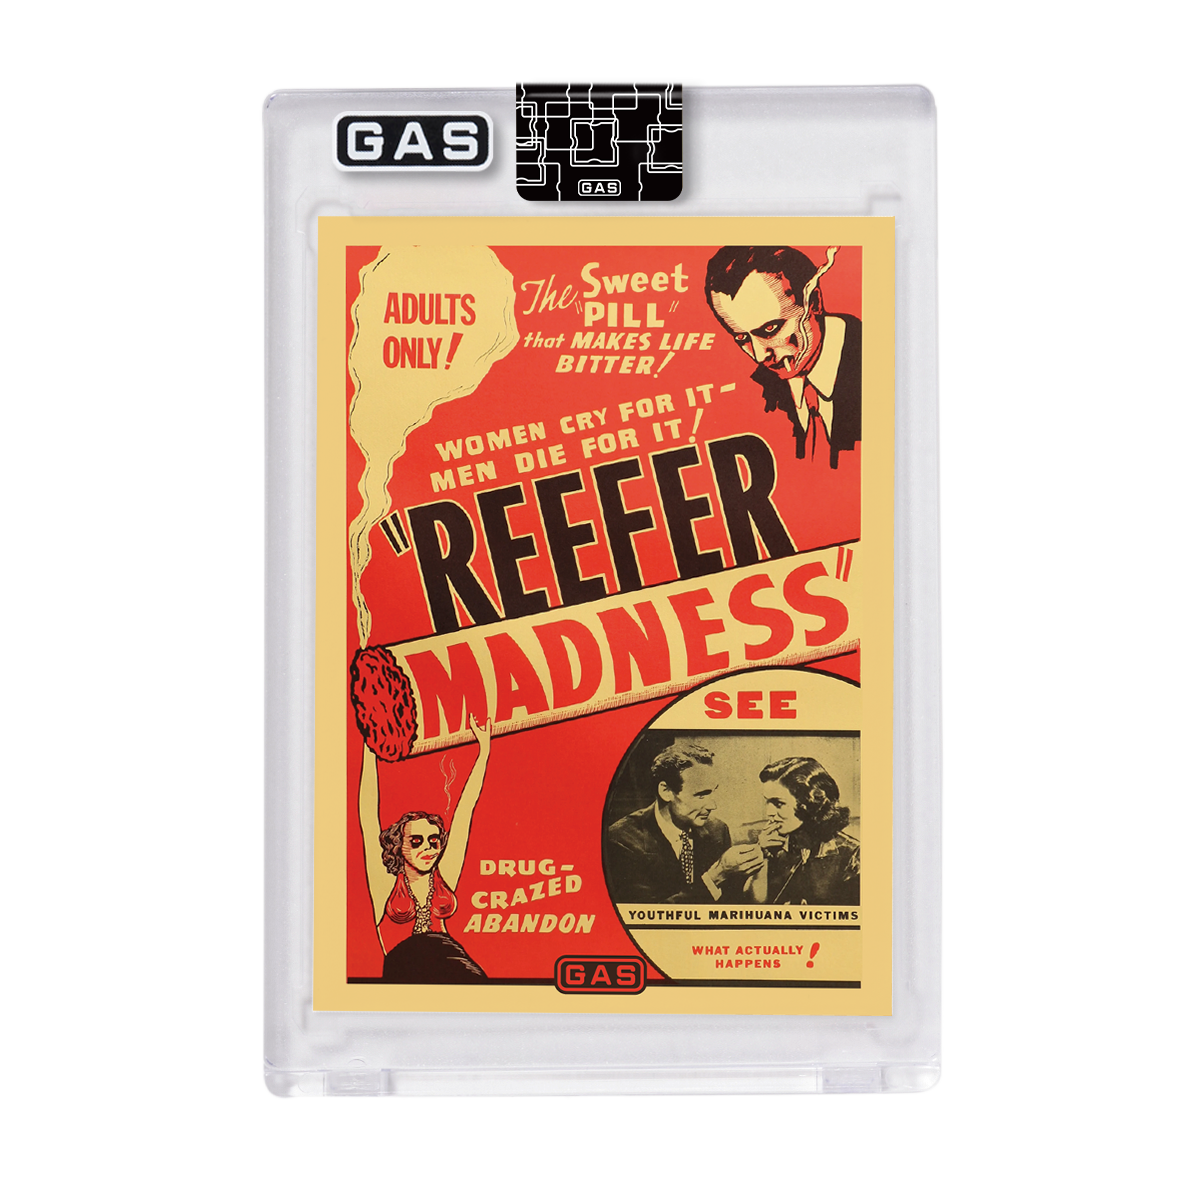 GAS Series 3 #26 Reefer Madness Open Edition Trading Card